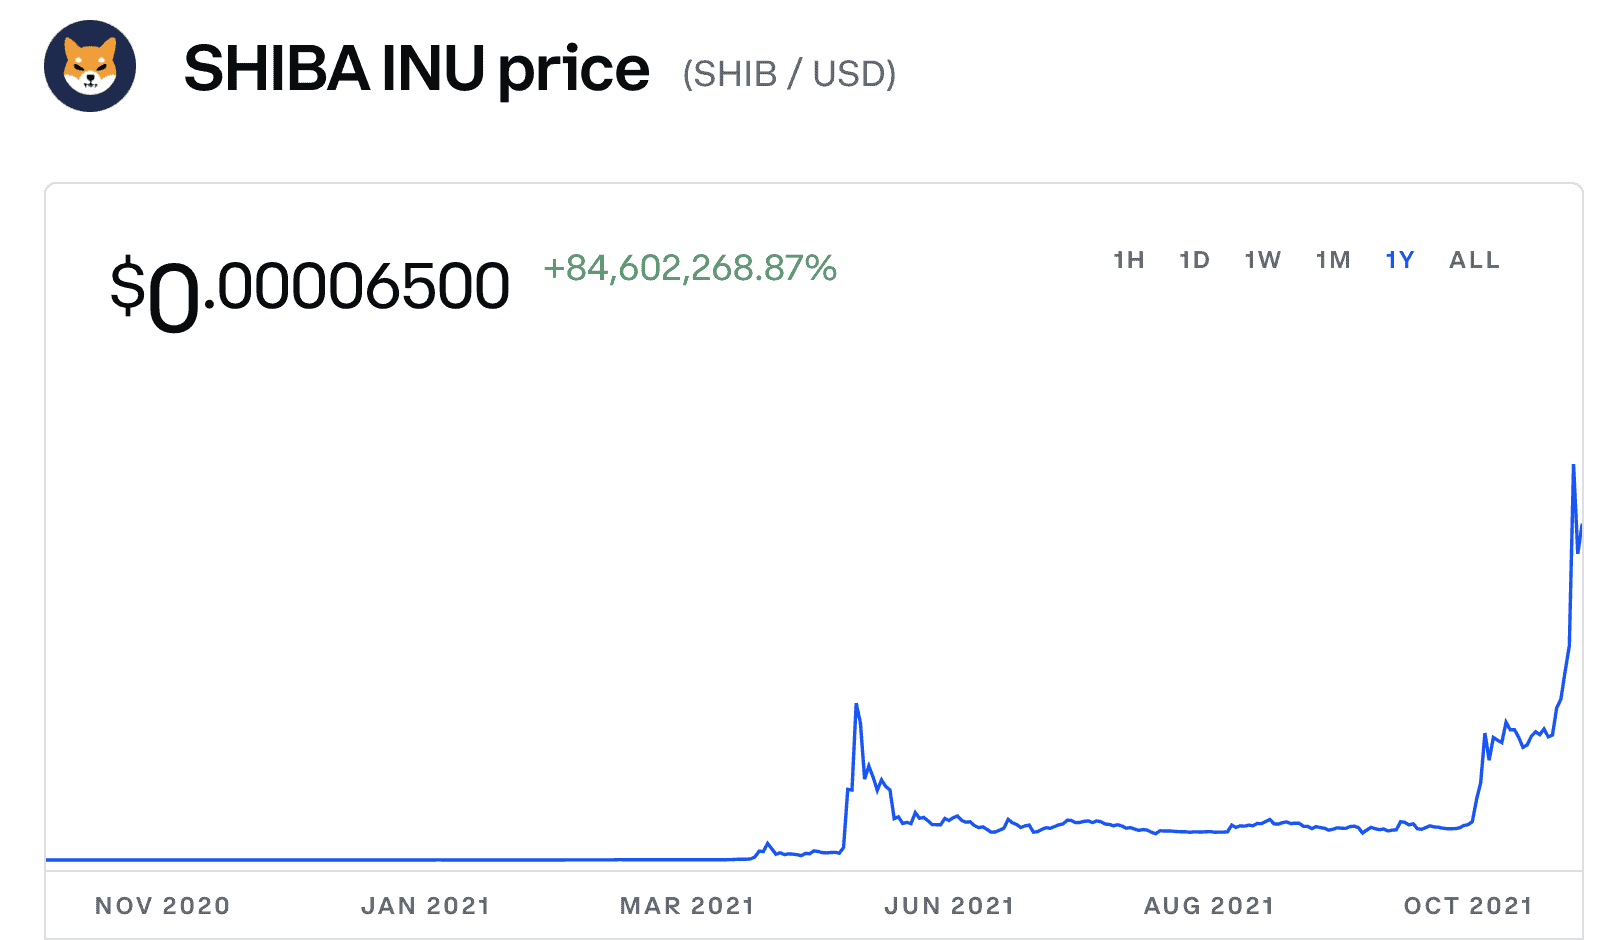 Chart of Shiba Inu price from late 2020 to late 2021.